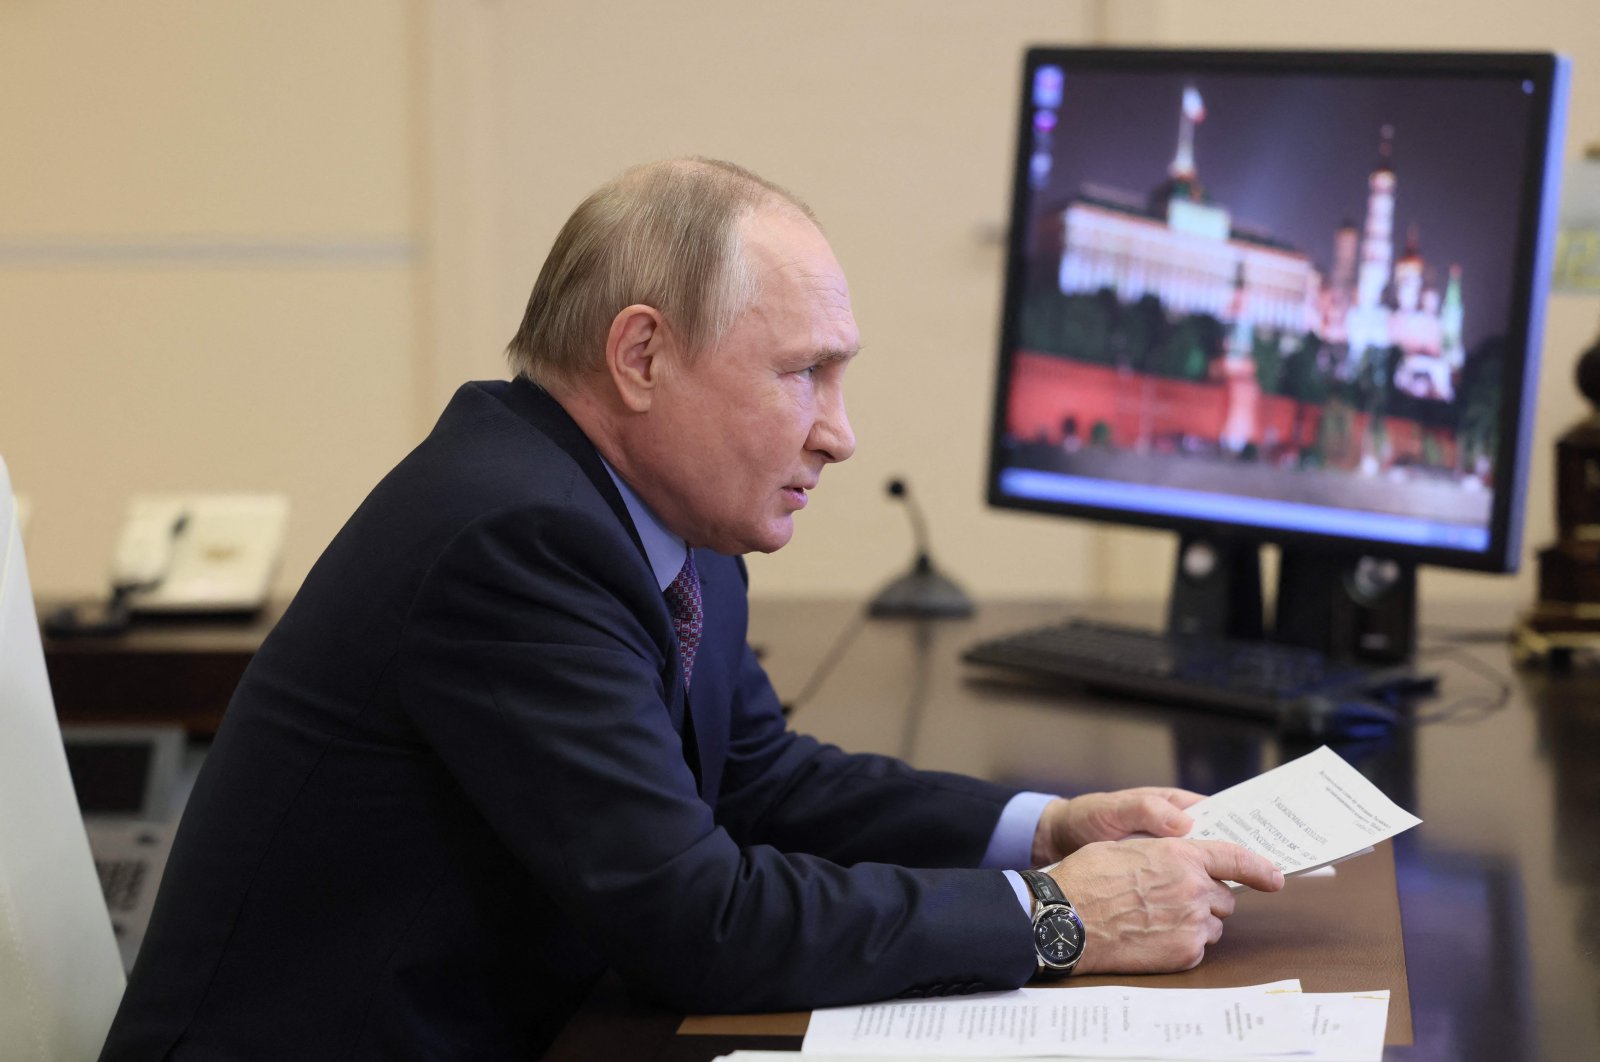 Russian President Vladimir Putin chairs a meeting of the Pobeda (Victory) organizing committee via teleconference call at the Novo-Ogaryovo state residence, outside Moscow, Russia, Nov. 15, 2022. (AFP Photo)